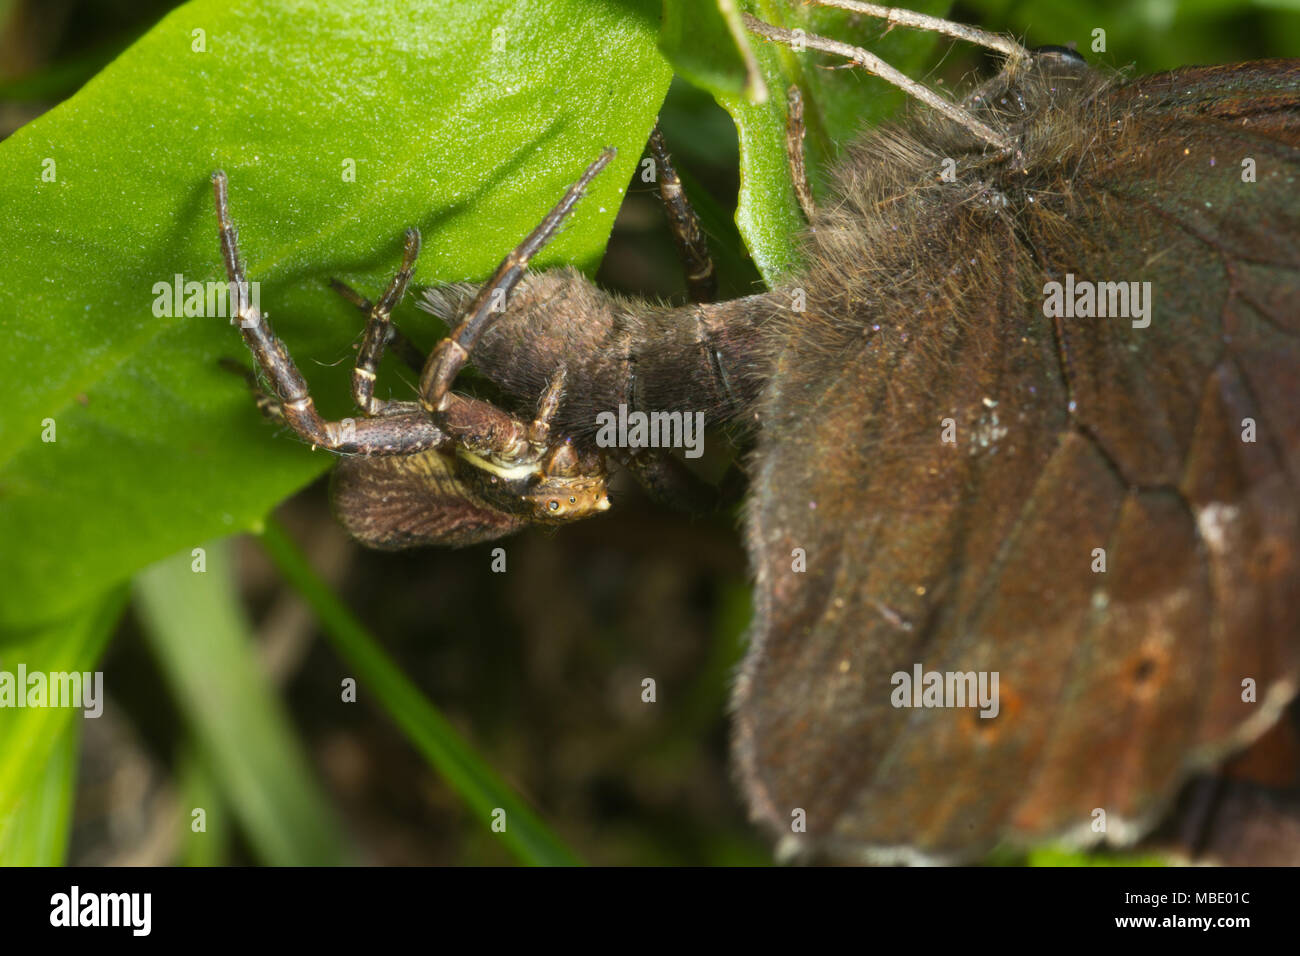 A small brown spider eating a butterfly, Italy Stock Photo